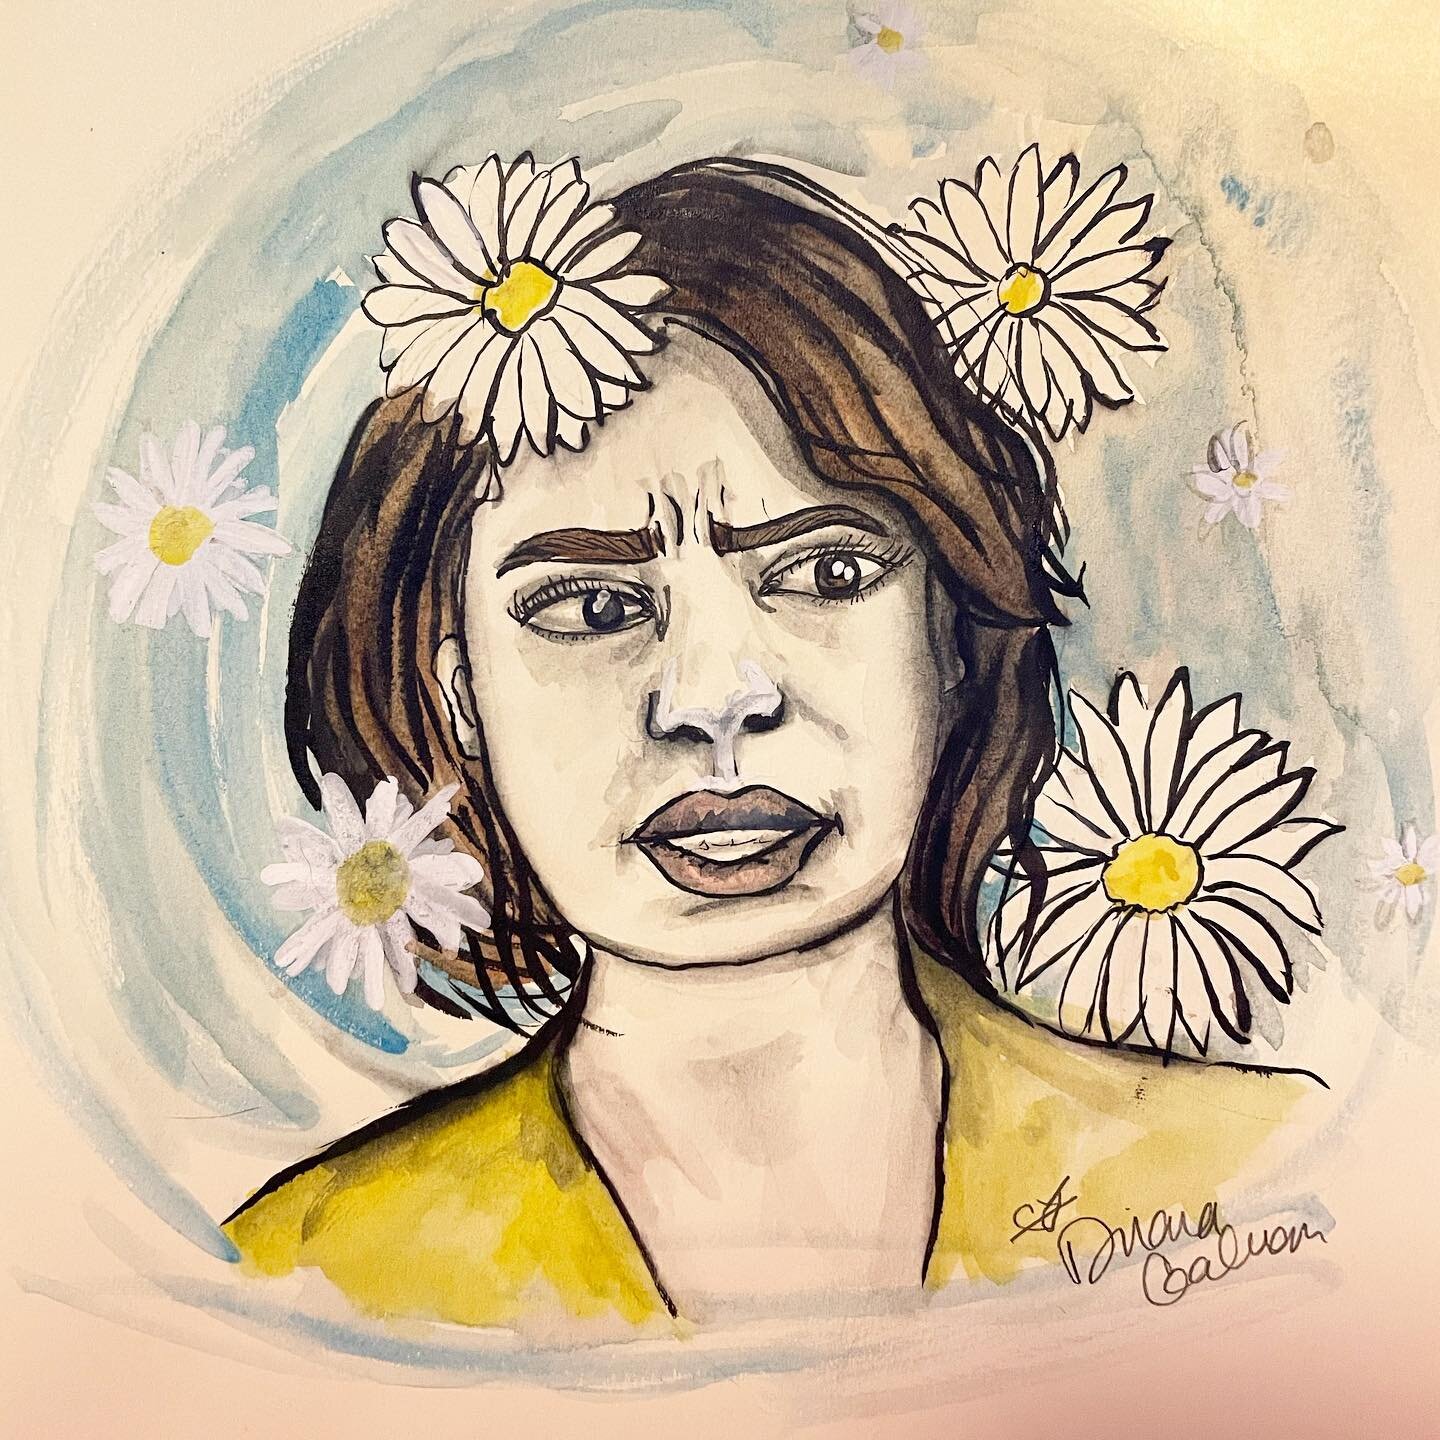 Decided to join a drawing challenge to keep me going #juneinbloom #daisydreams #inkwash #watercolor #dailydrawing thanks @daphne.designs for sharing this challenge #portrait #portraitdrawing